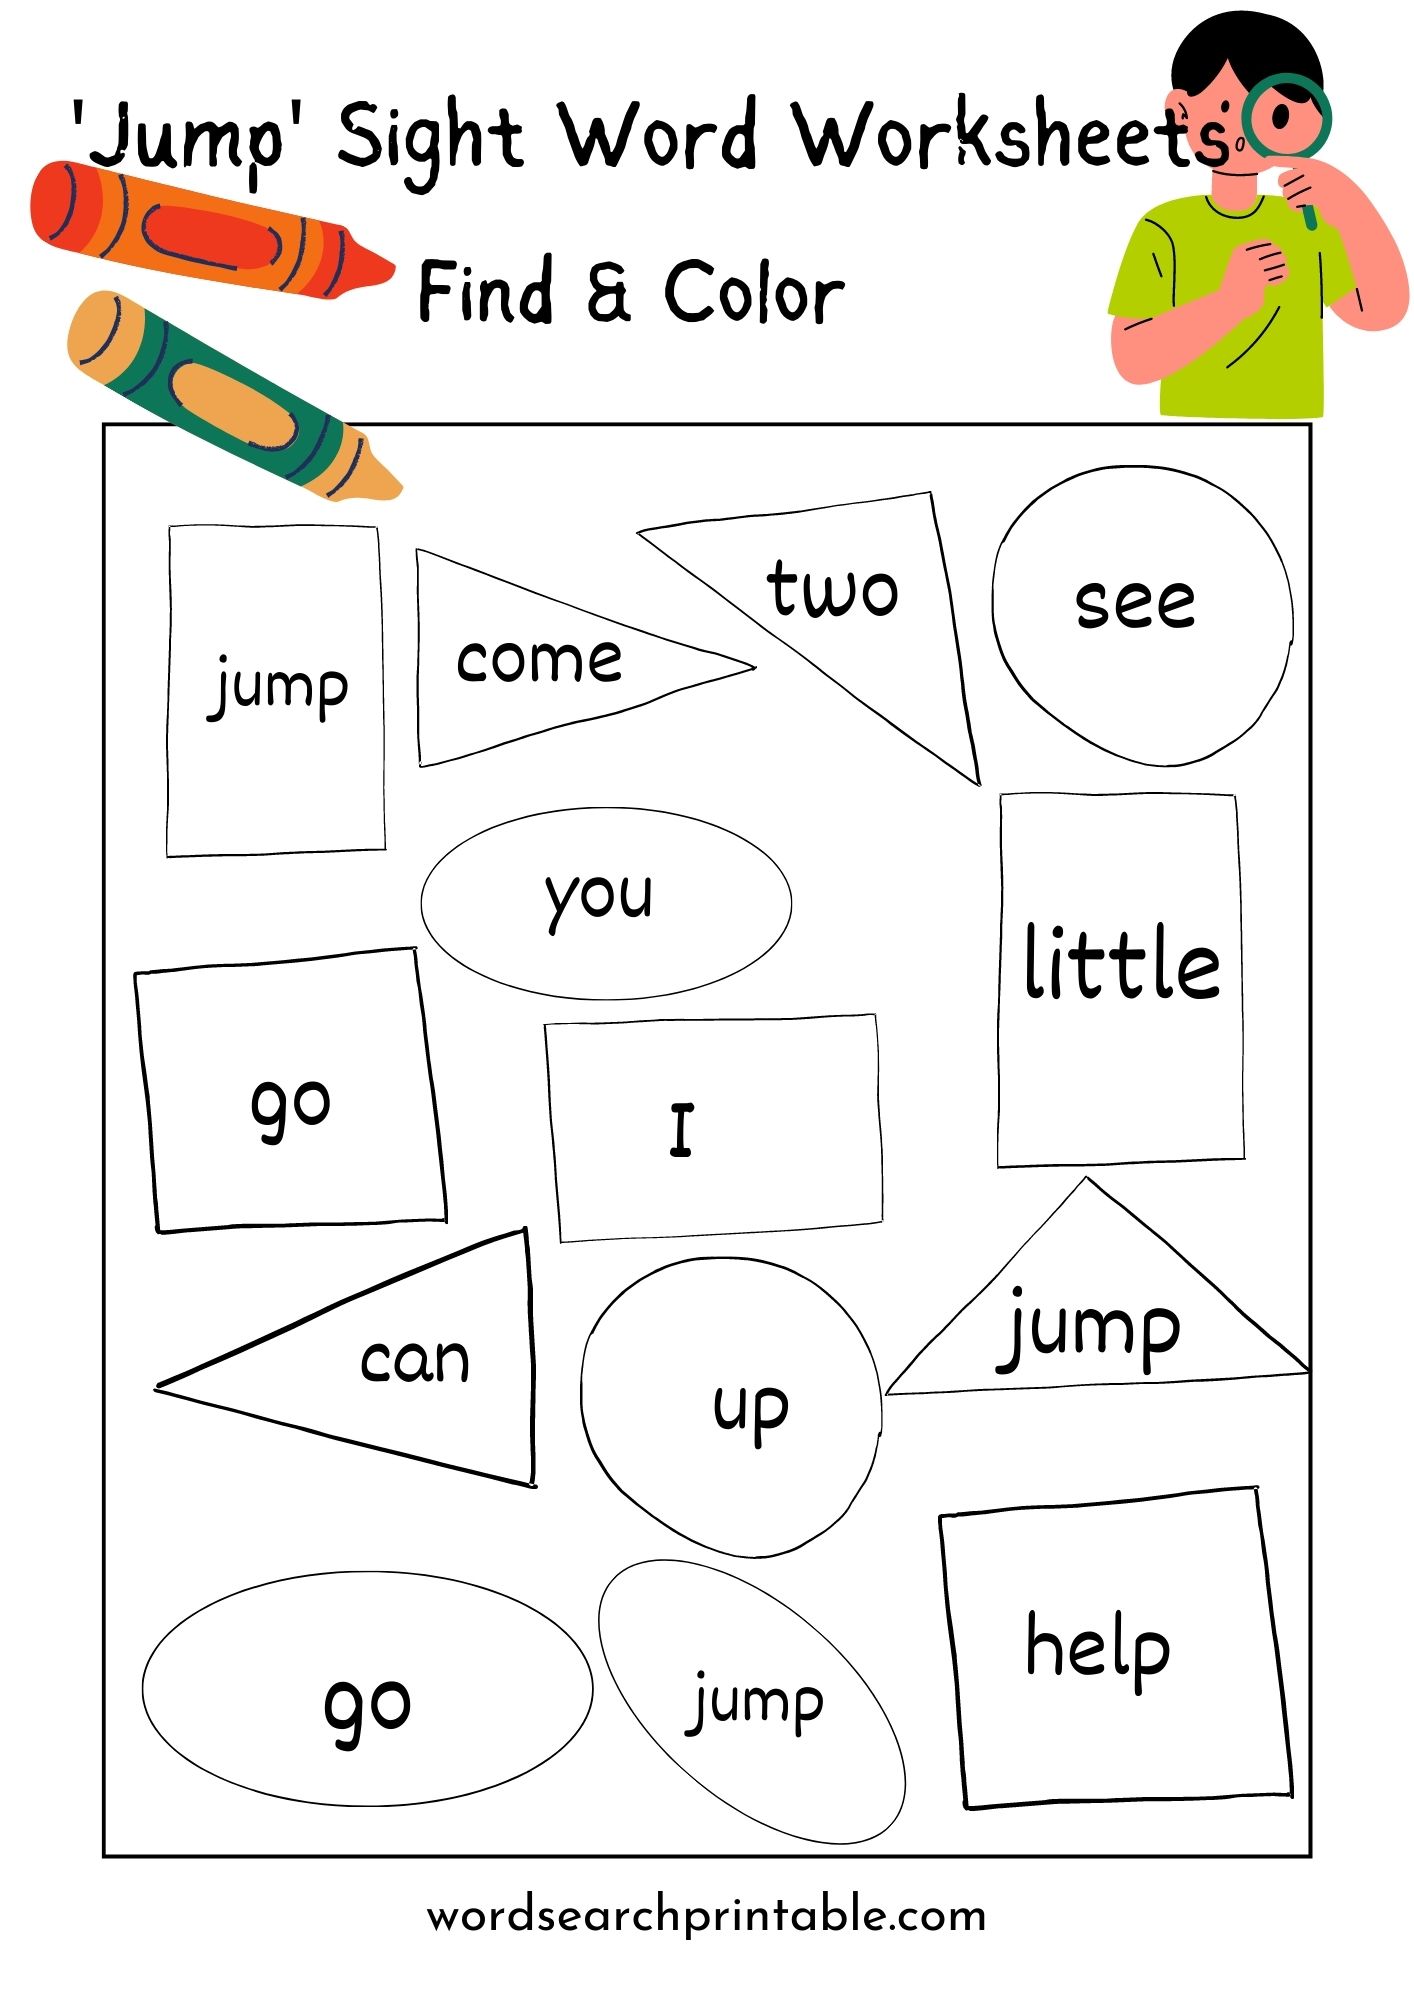 Find sight word Jump and Color the geometric shape